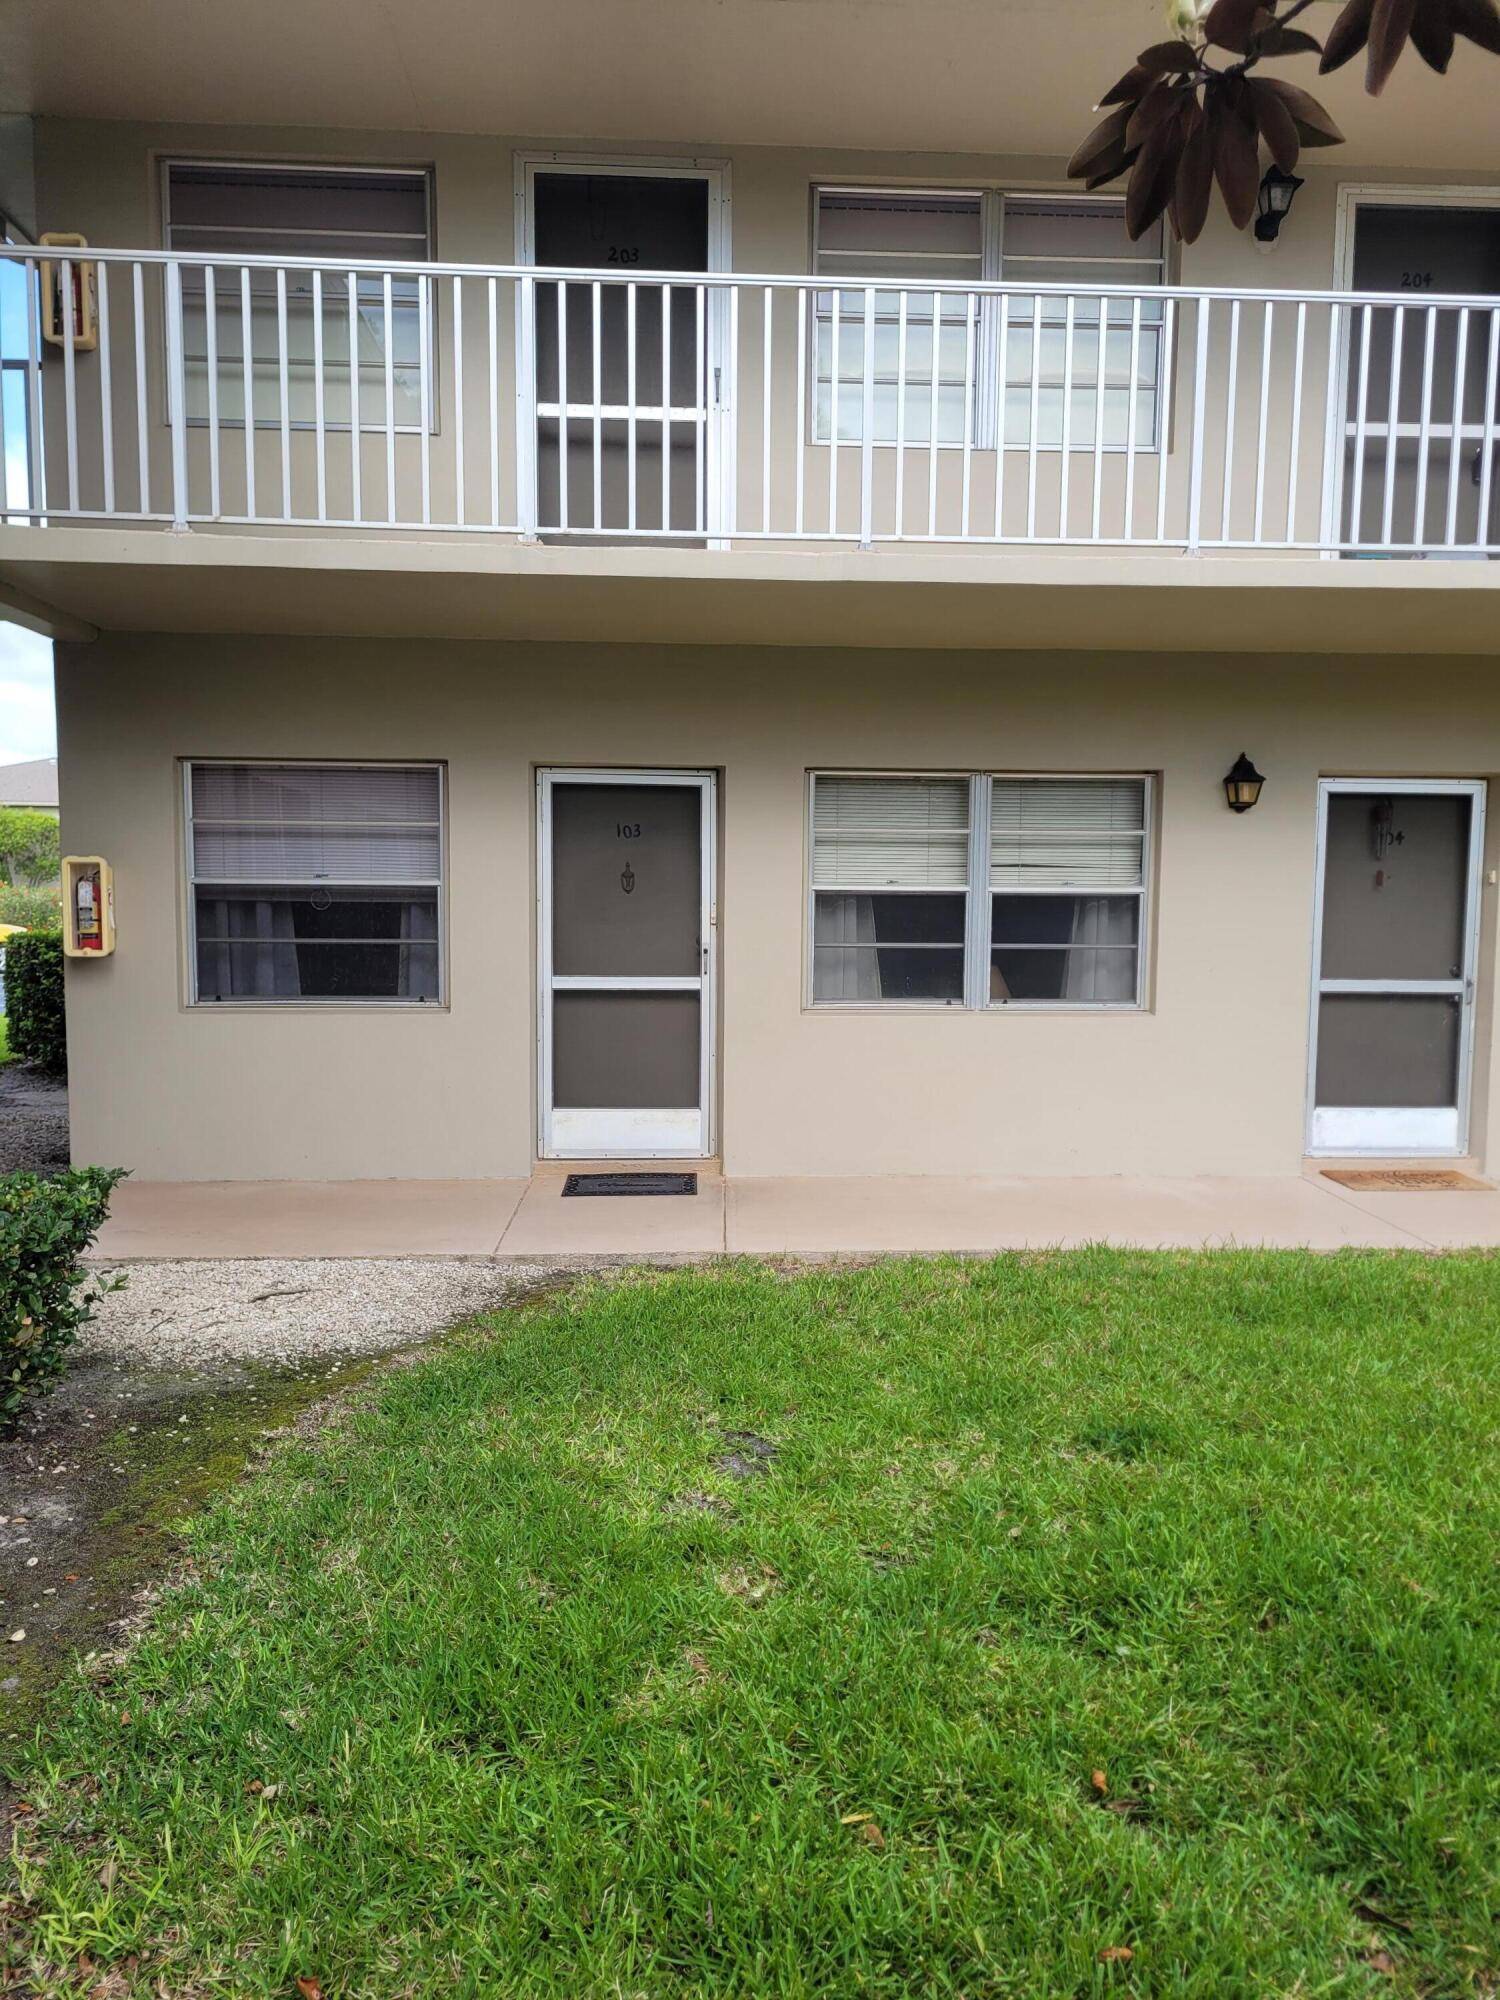 Excellent 55 community. Unit is located in the rear of the development.